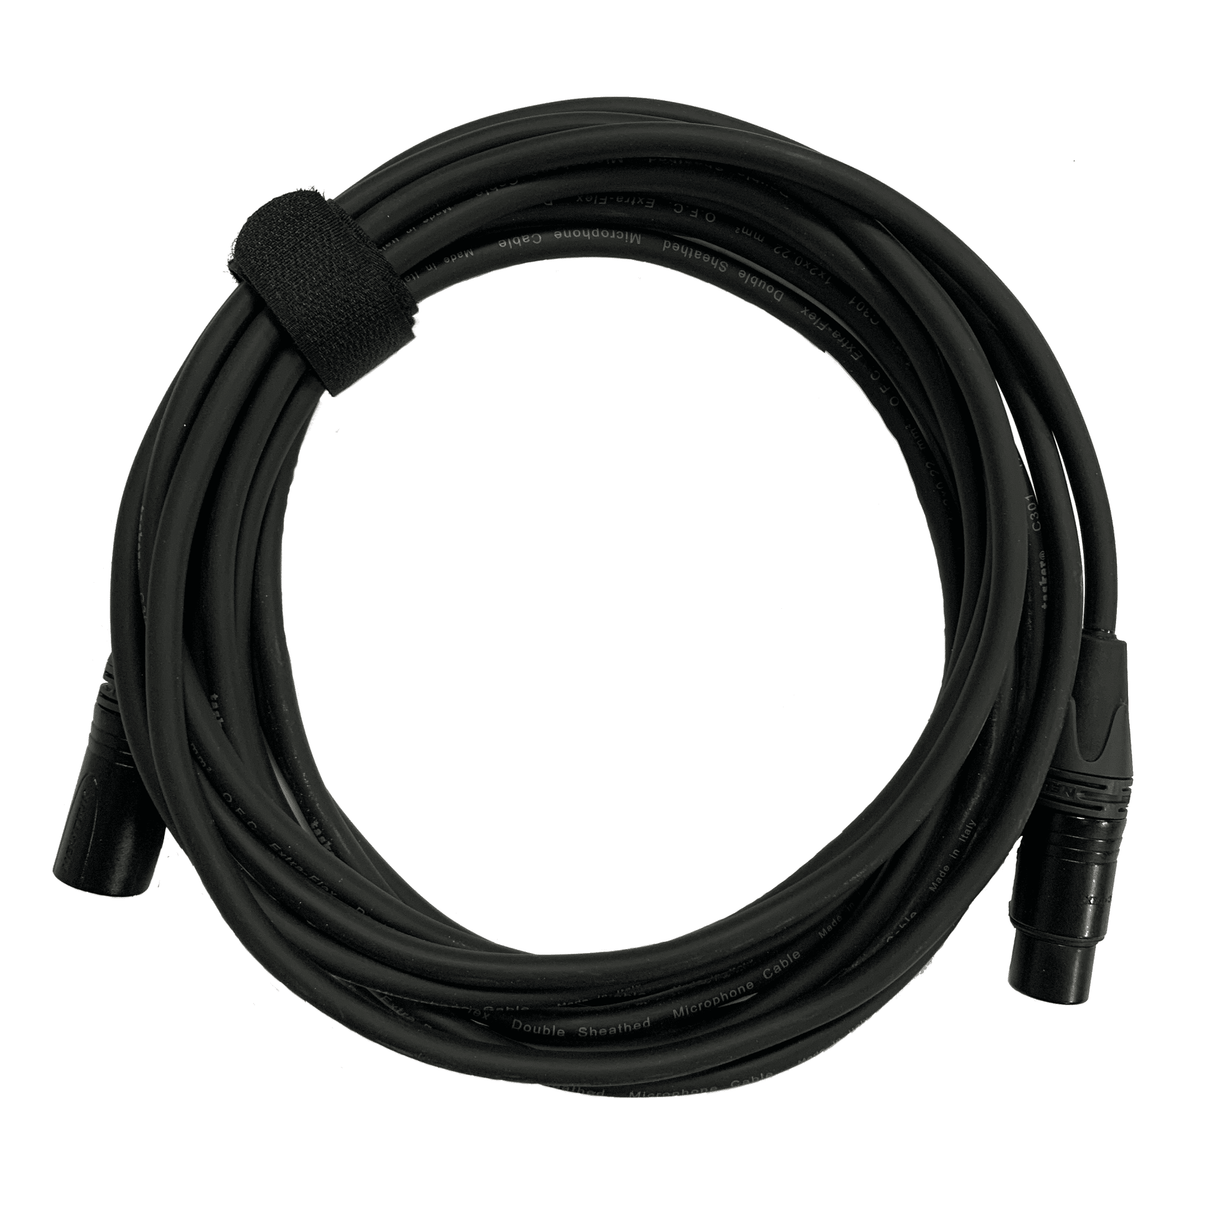 Rough Cable's XLR Cable A+ kwaliteit | 2,5 Meter